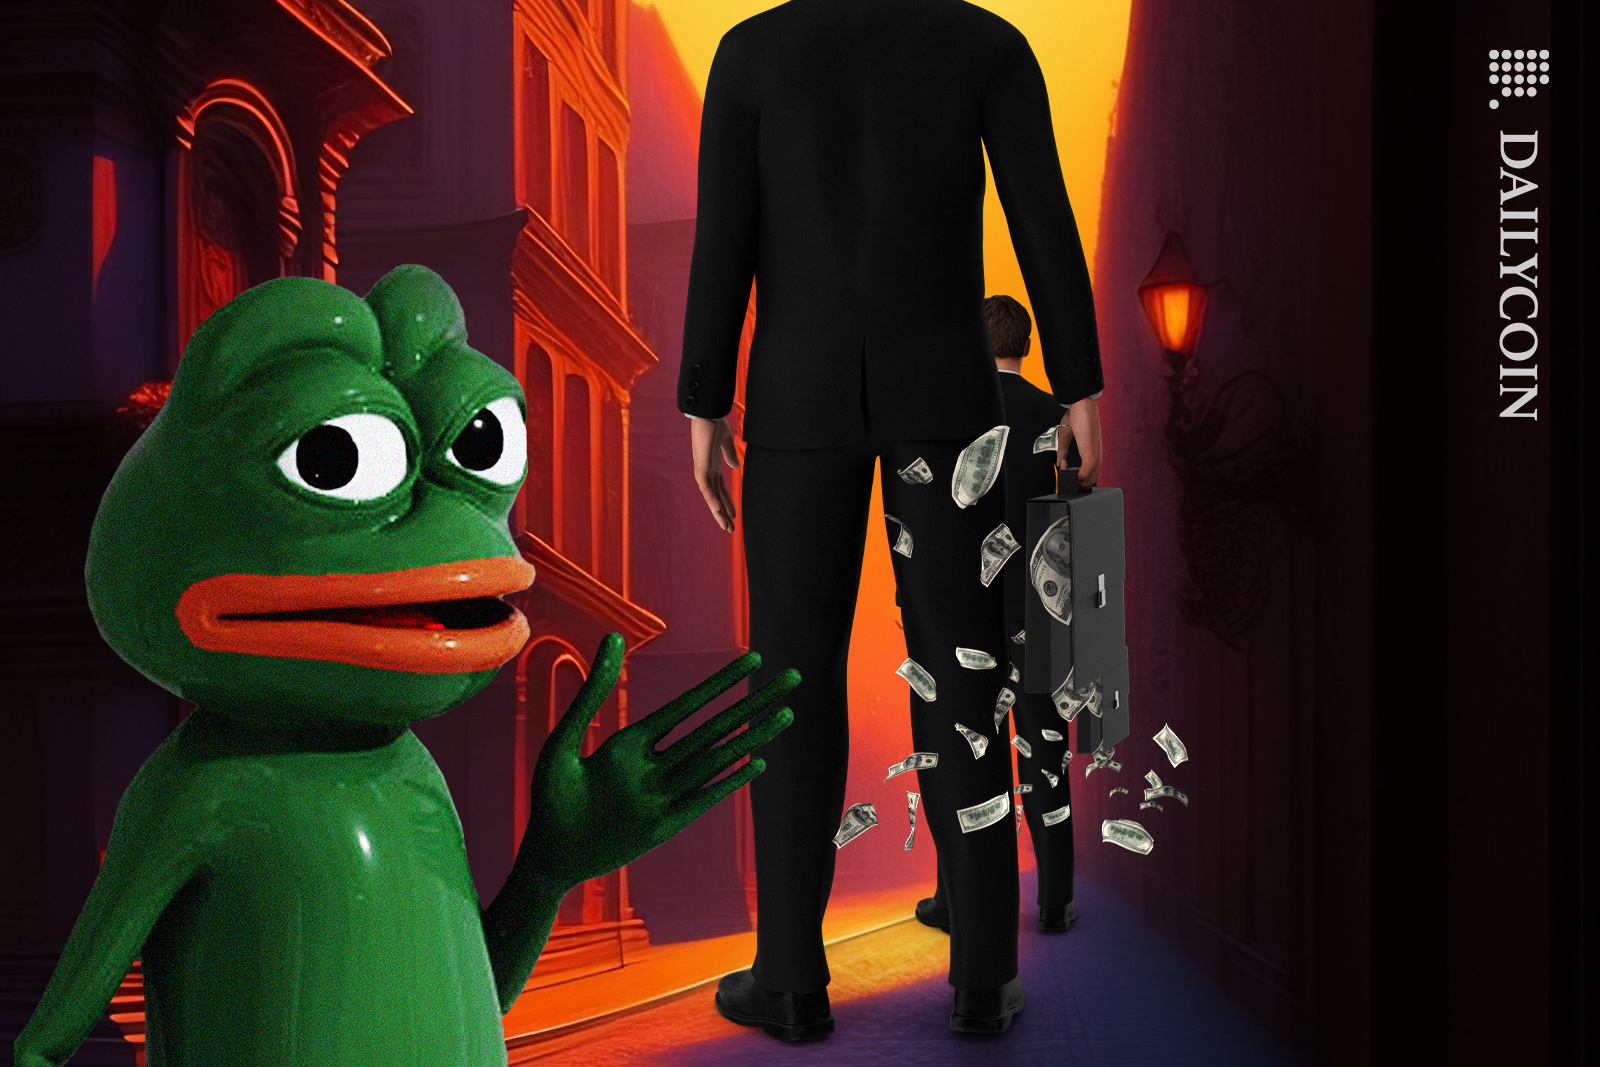 Pepe pointing out to his staff walking away with the money.